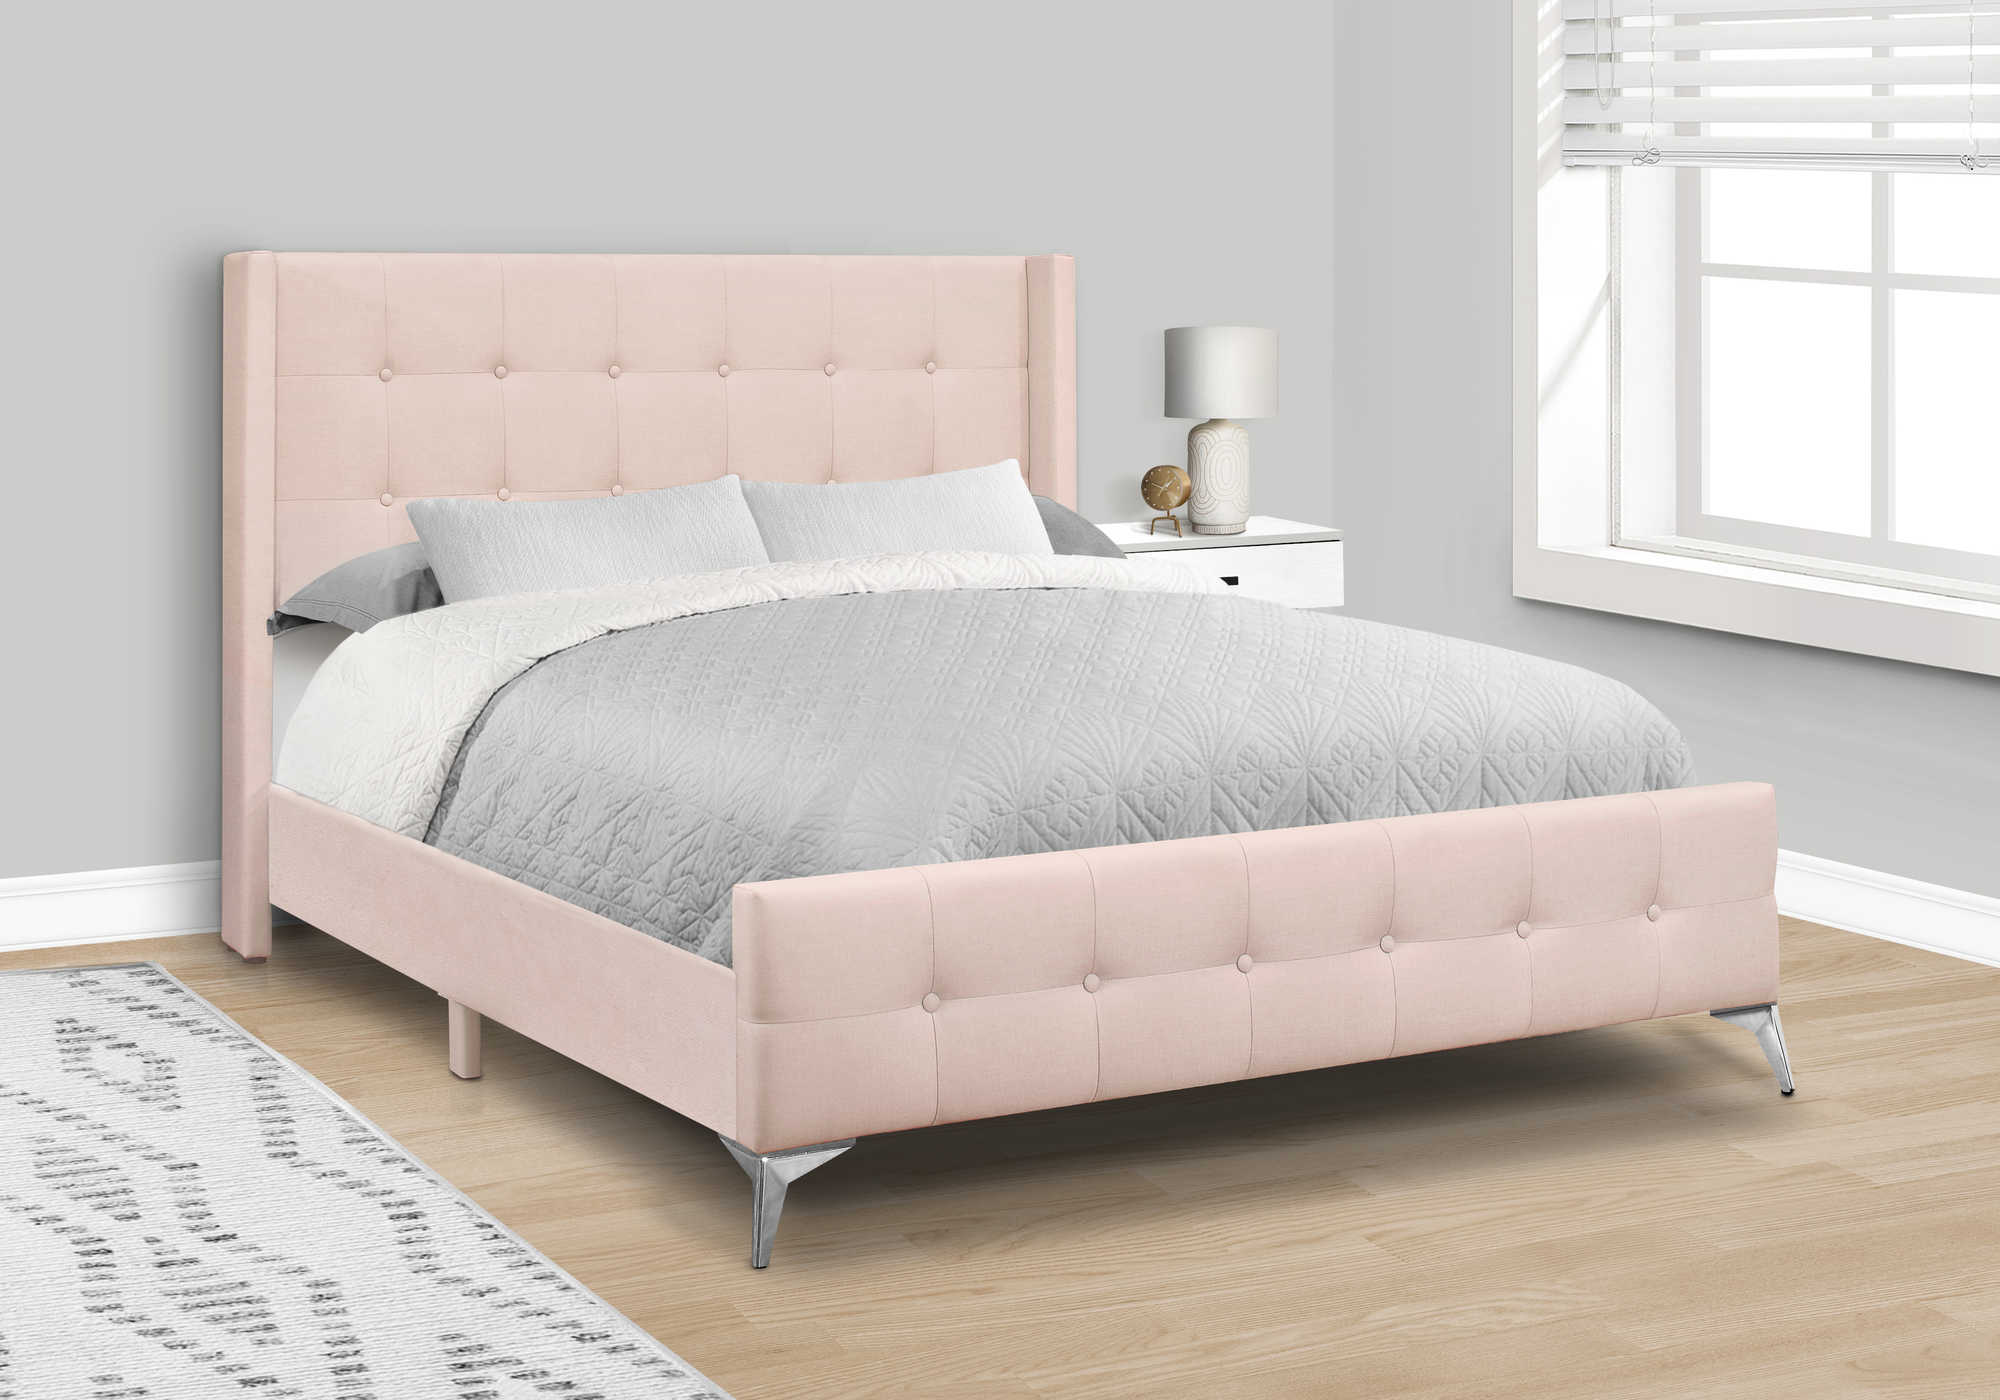 BED - QUEEN SIZE / PINK VELVET WITH CHROME METAL LEGS